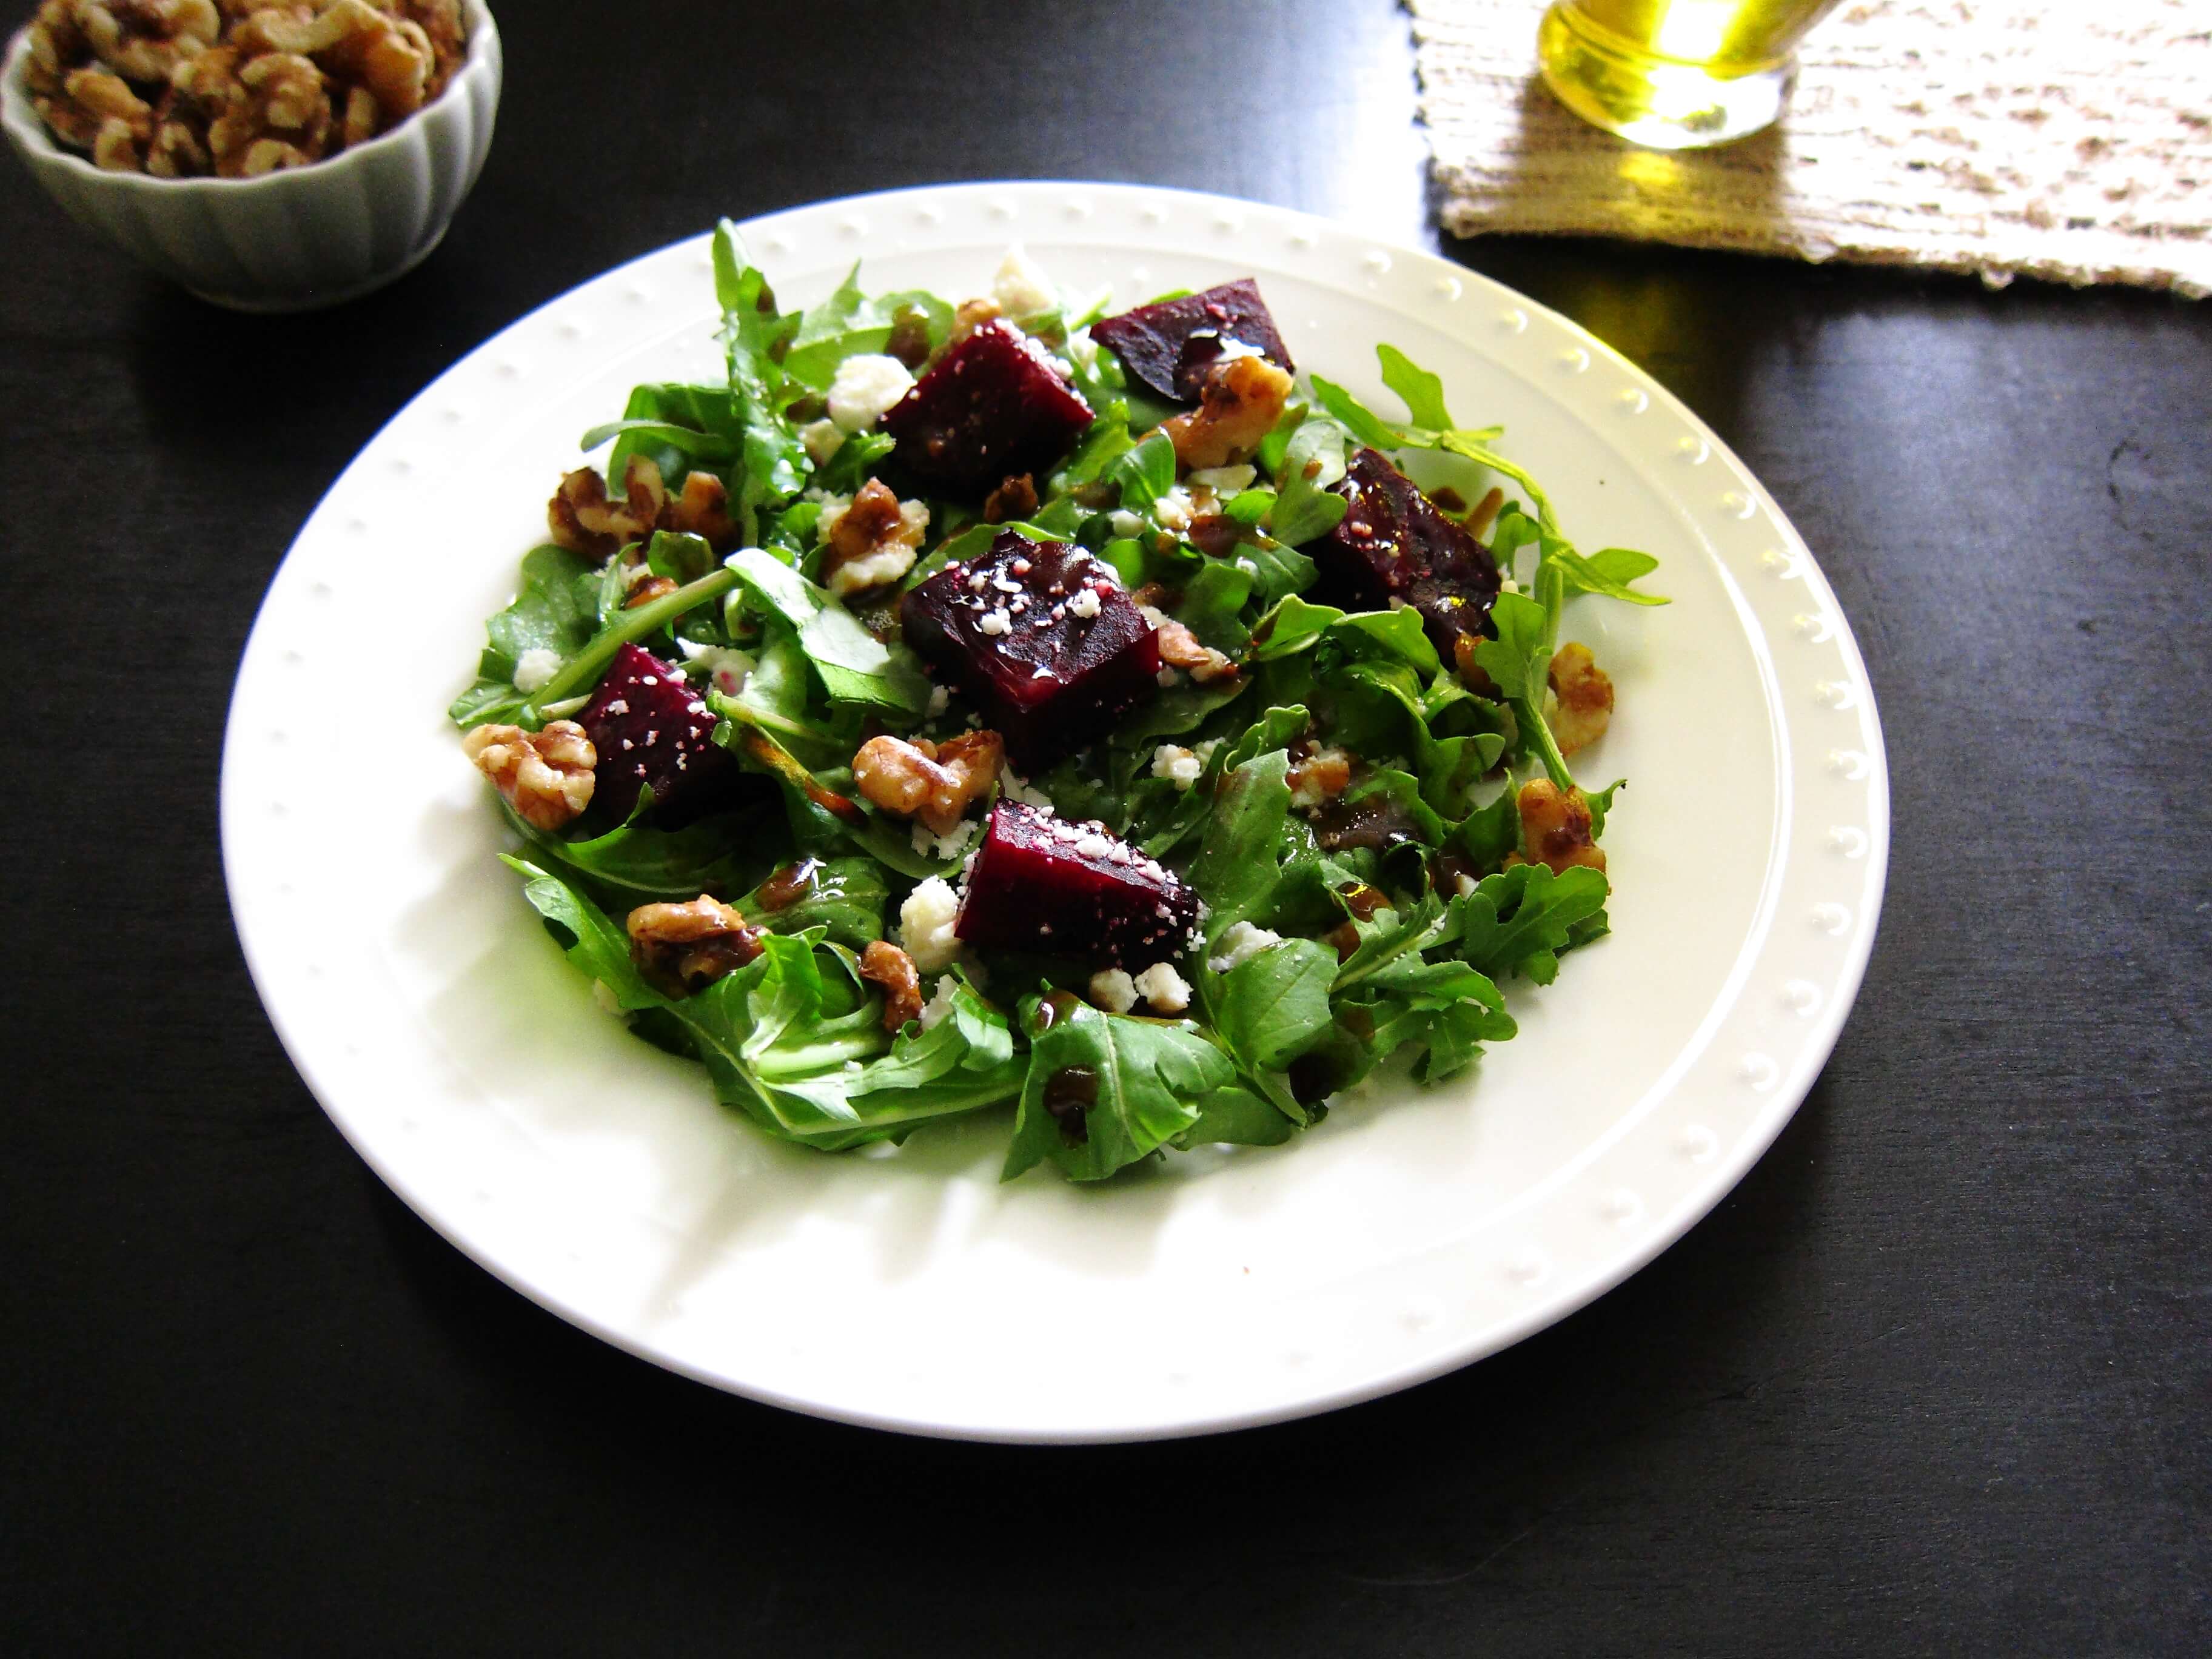 Instant Pot Beet Salad with arugula, goat cheese and walnuts on a white plate